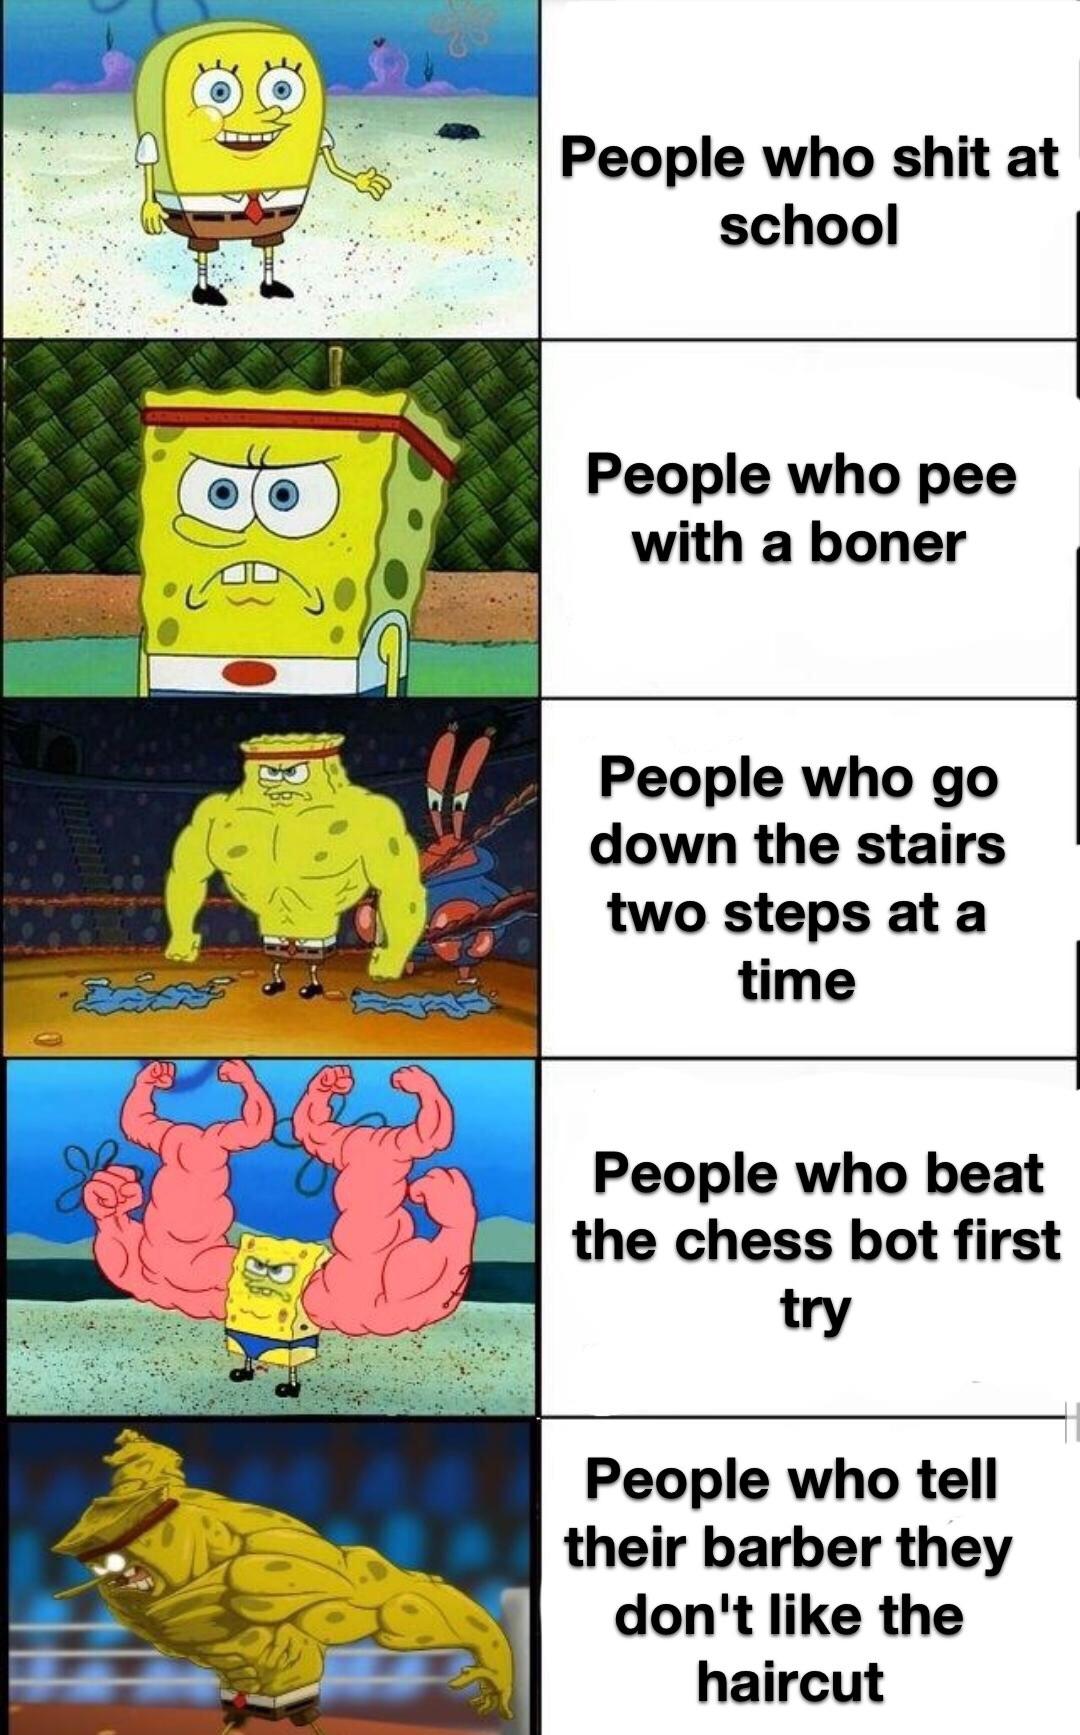 spongebob spongebob-memes spongebob text: People who shit at school People who pee with a boner People who go down the stairs two steps at a time People who beat the chess bot first try People who tell their barber they donlt like the haircut 